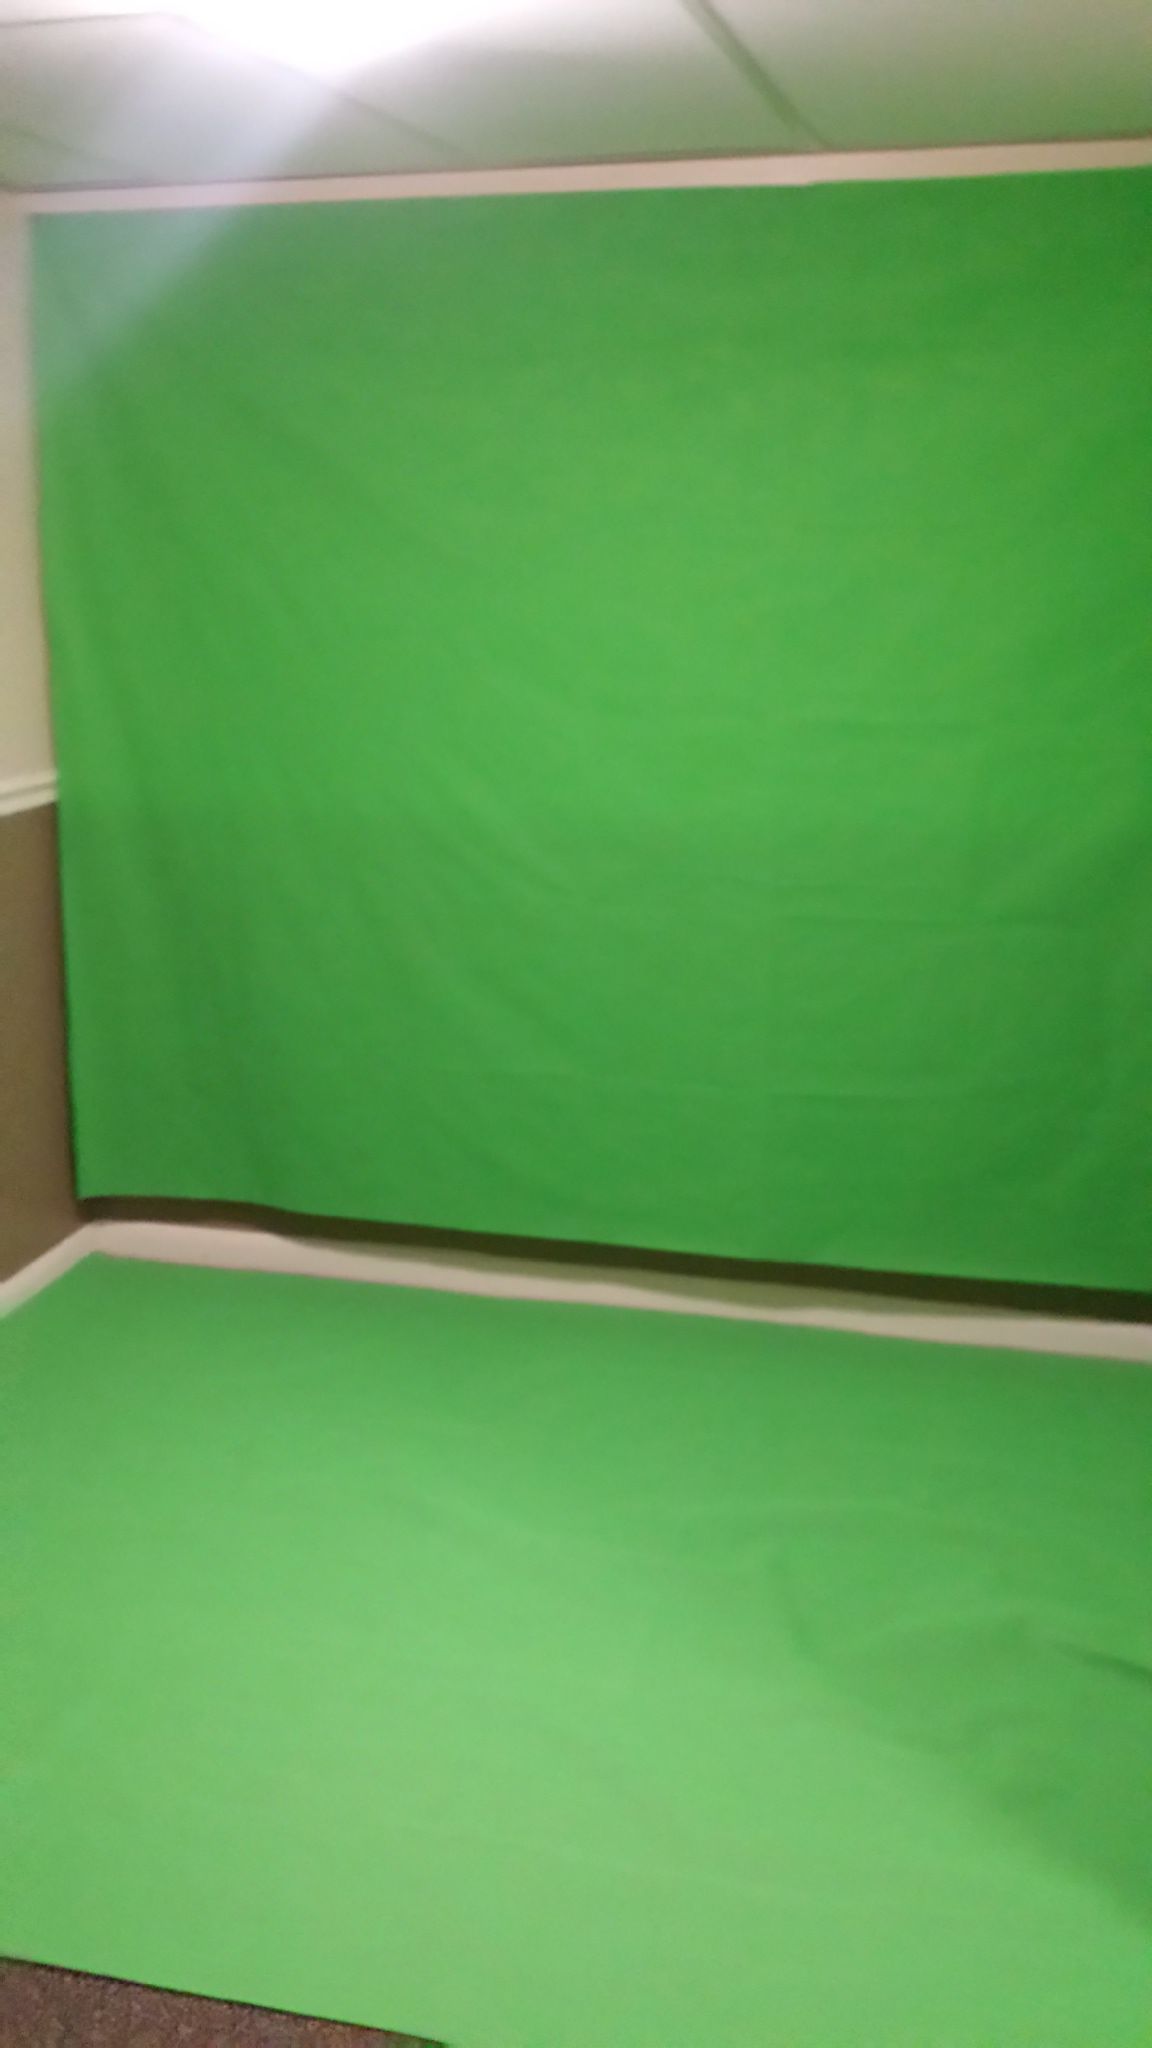 New pro green screen. 2 panels. Each: 6.5 ft by 9.5 ft. Cover a huge area, great for videos, photography, photoshop